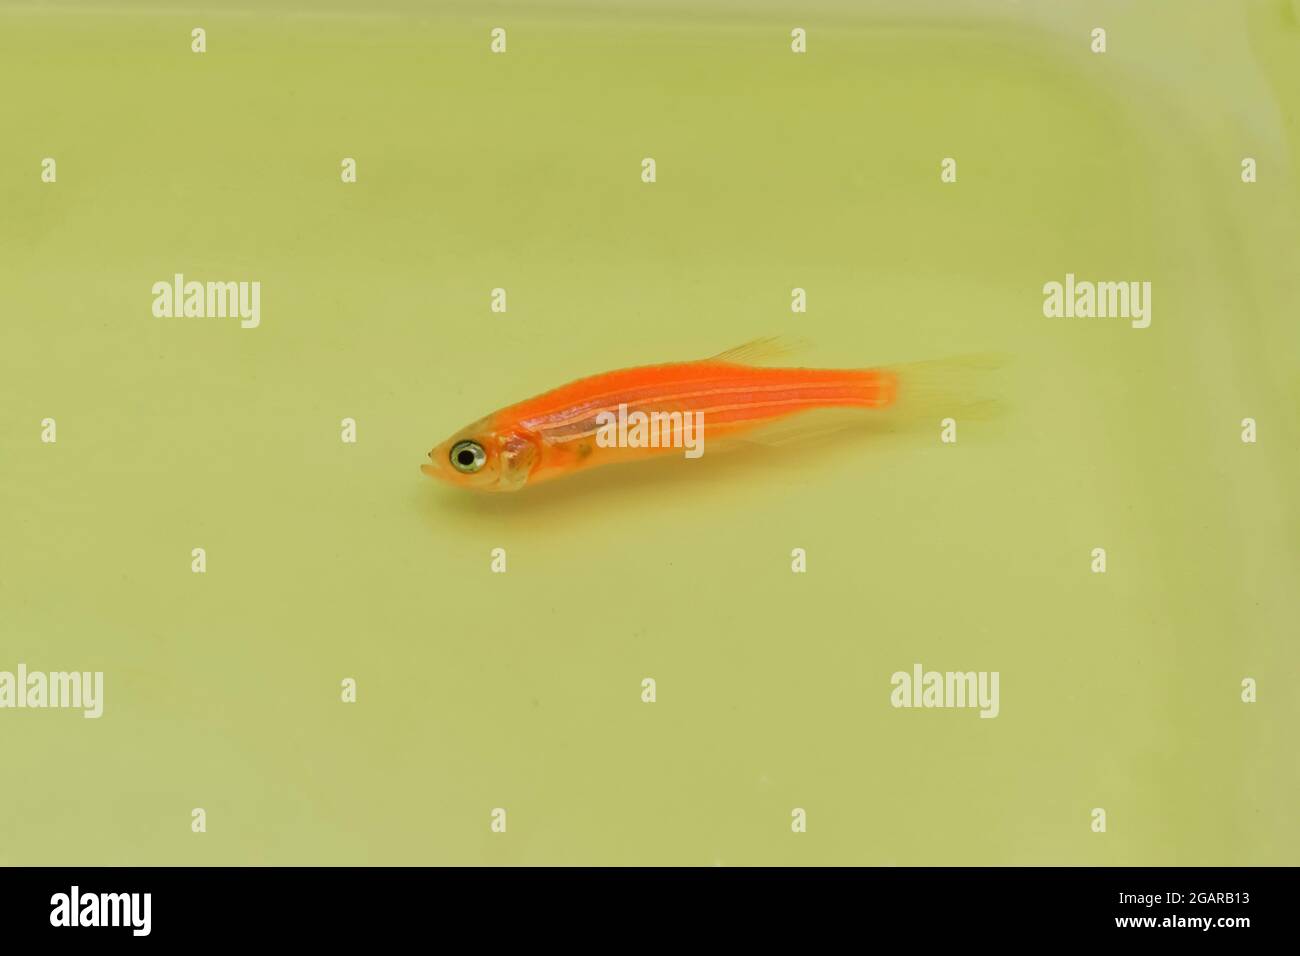 Orange zebra danio fish died due to poor water quality i.e. ammonia poisoning. Dead Small fish on the surface of water. Stock Photo